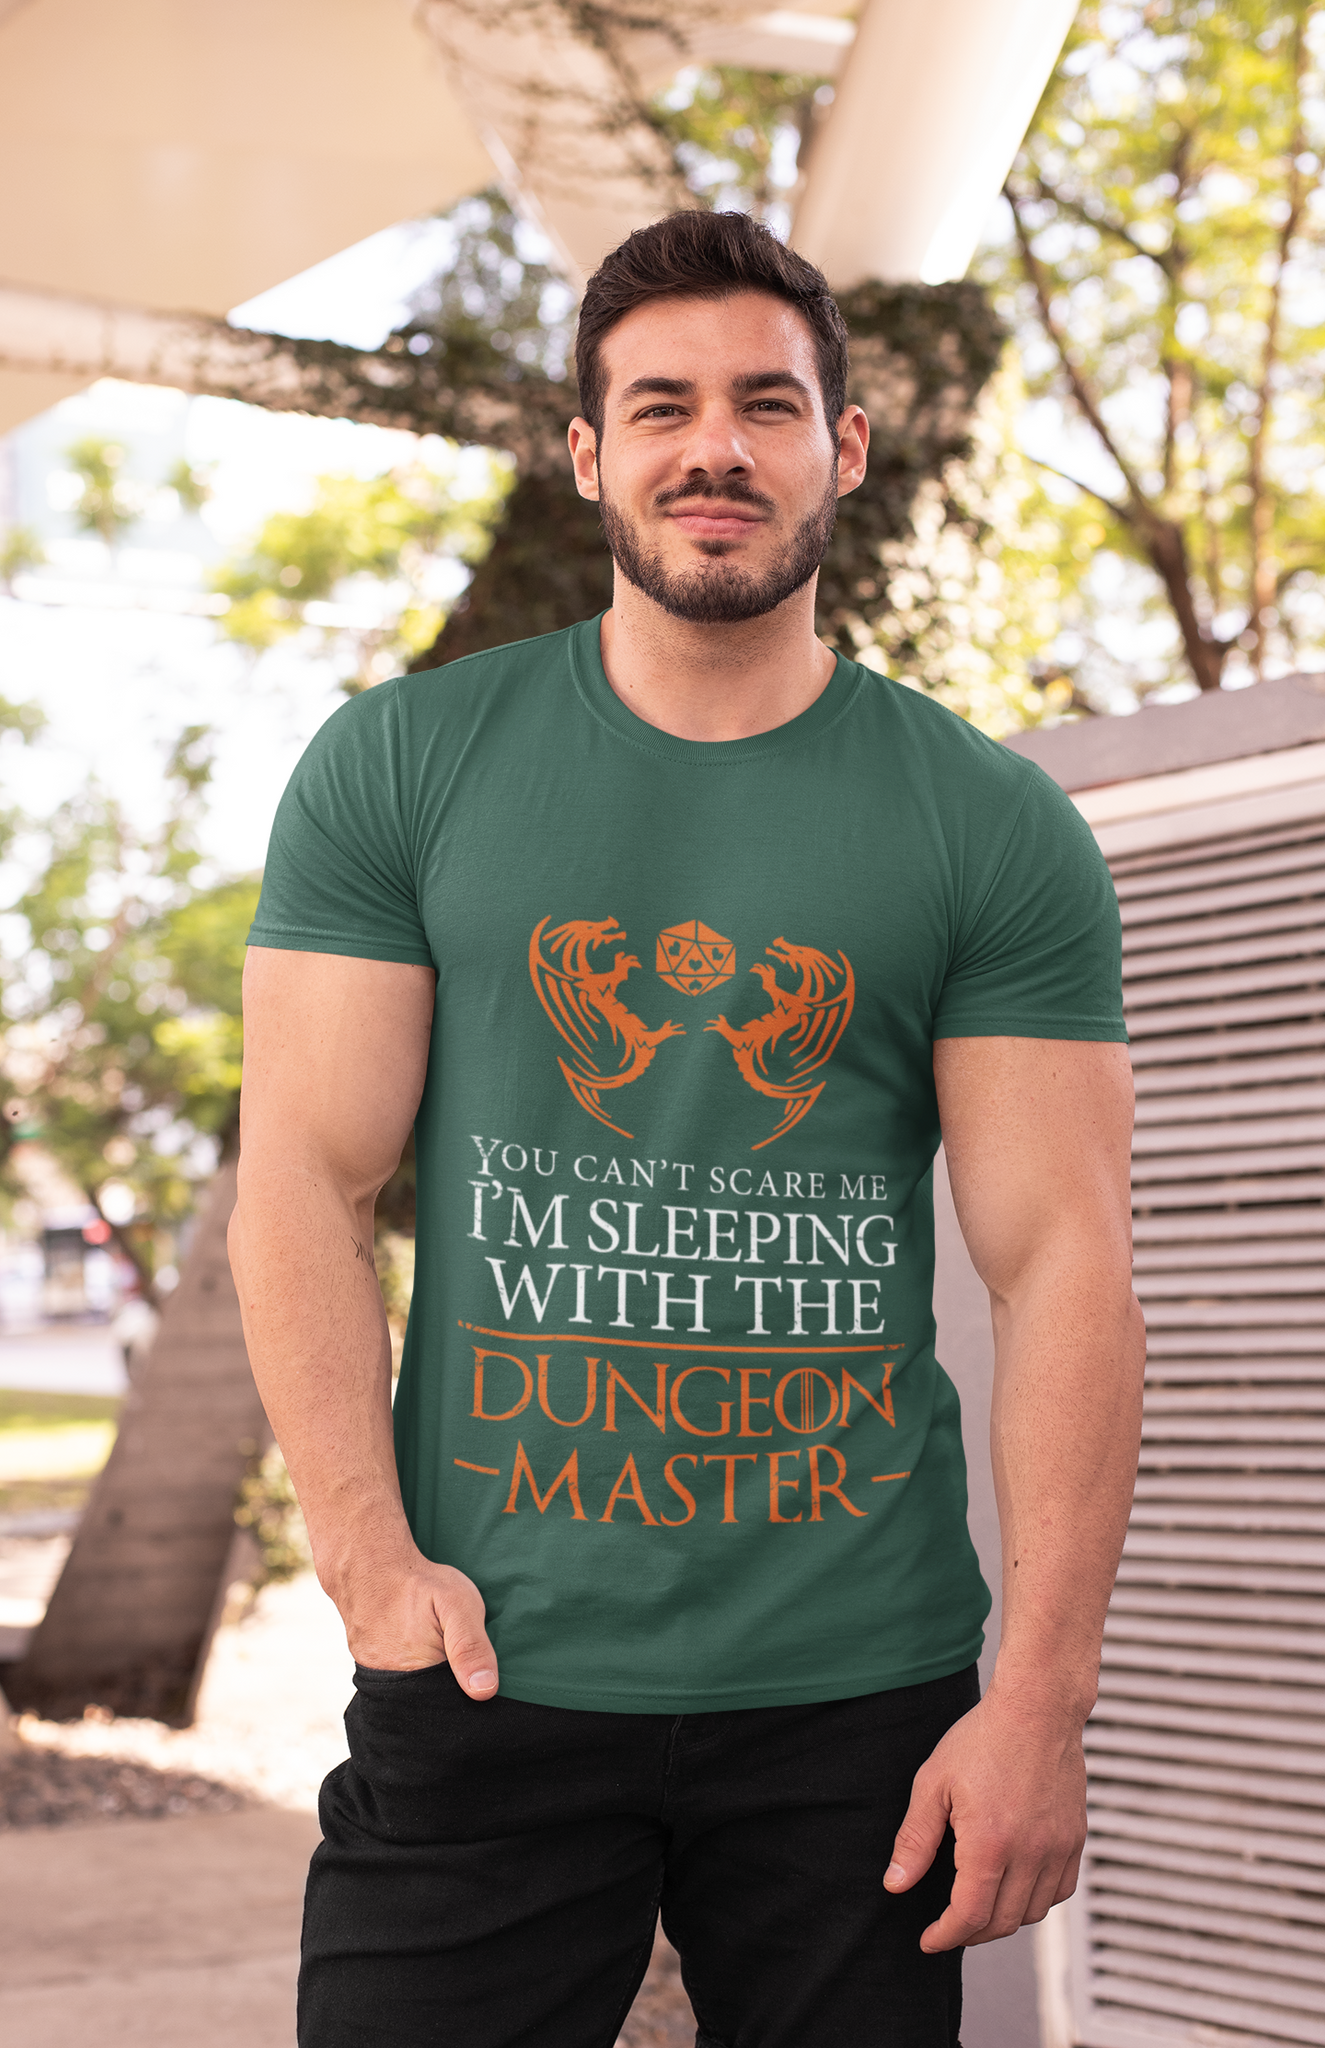 Dungeon And Dragon T Shirt, You Cant Scare Me Im Sleeping With The Dungeon Master DND T Shirt, RPG Dice Games Tshirt